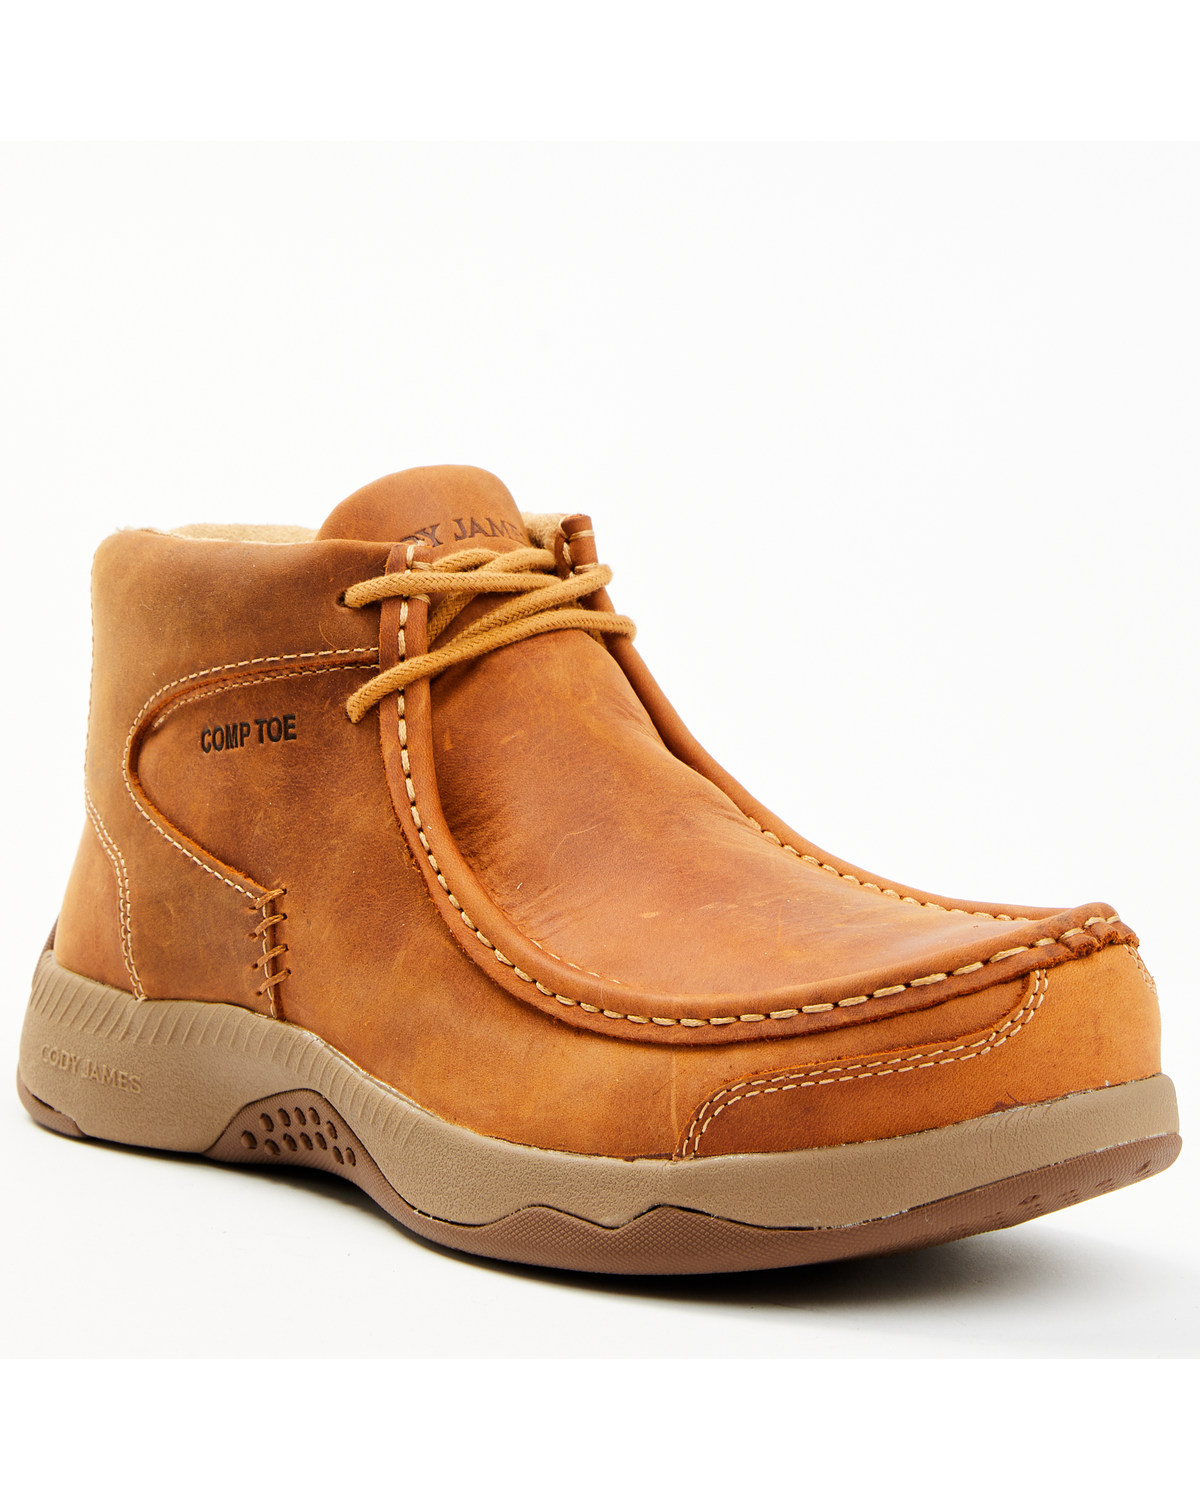 Cody James Men's Casual Wallabee Big Brother Lace-Up Work Boots - Composite Toe